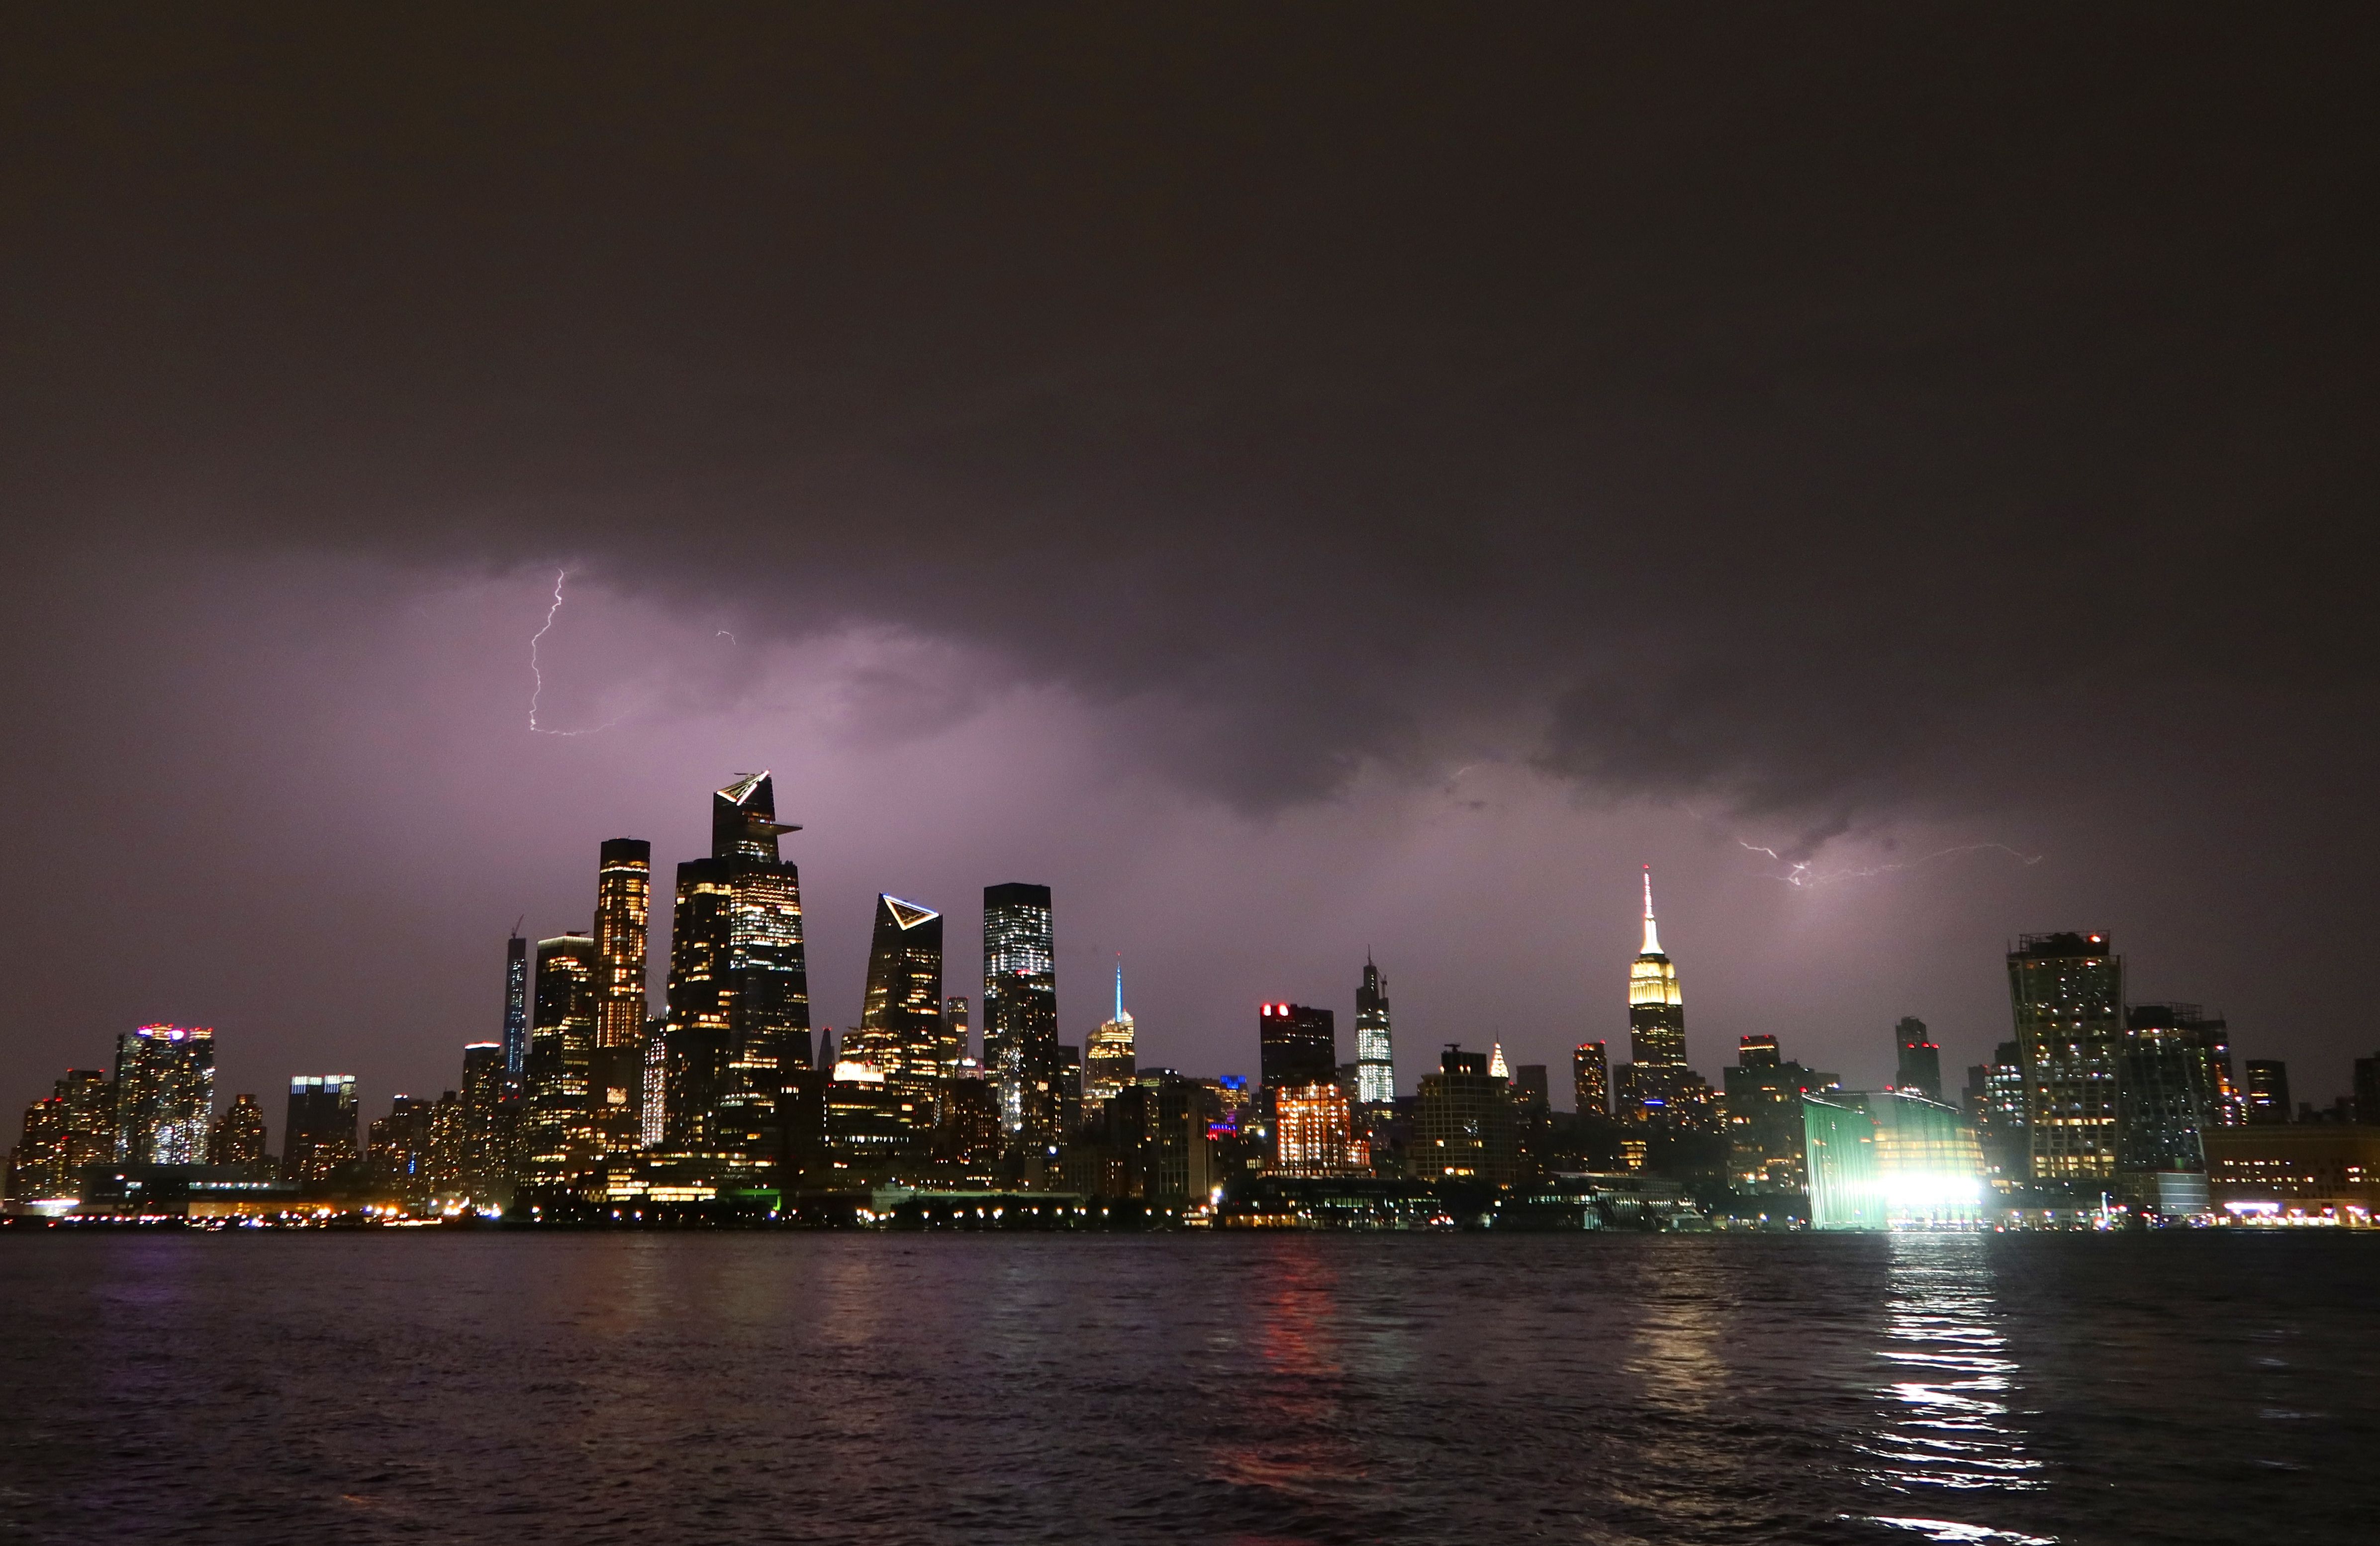  Lightning lights up the sky behind midtown Manhattan and the Empire State Building ahead of the expected arrival of Hurricane Isaias in the New York City area on August 3